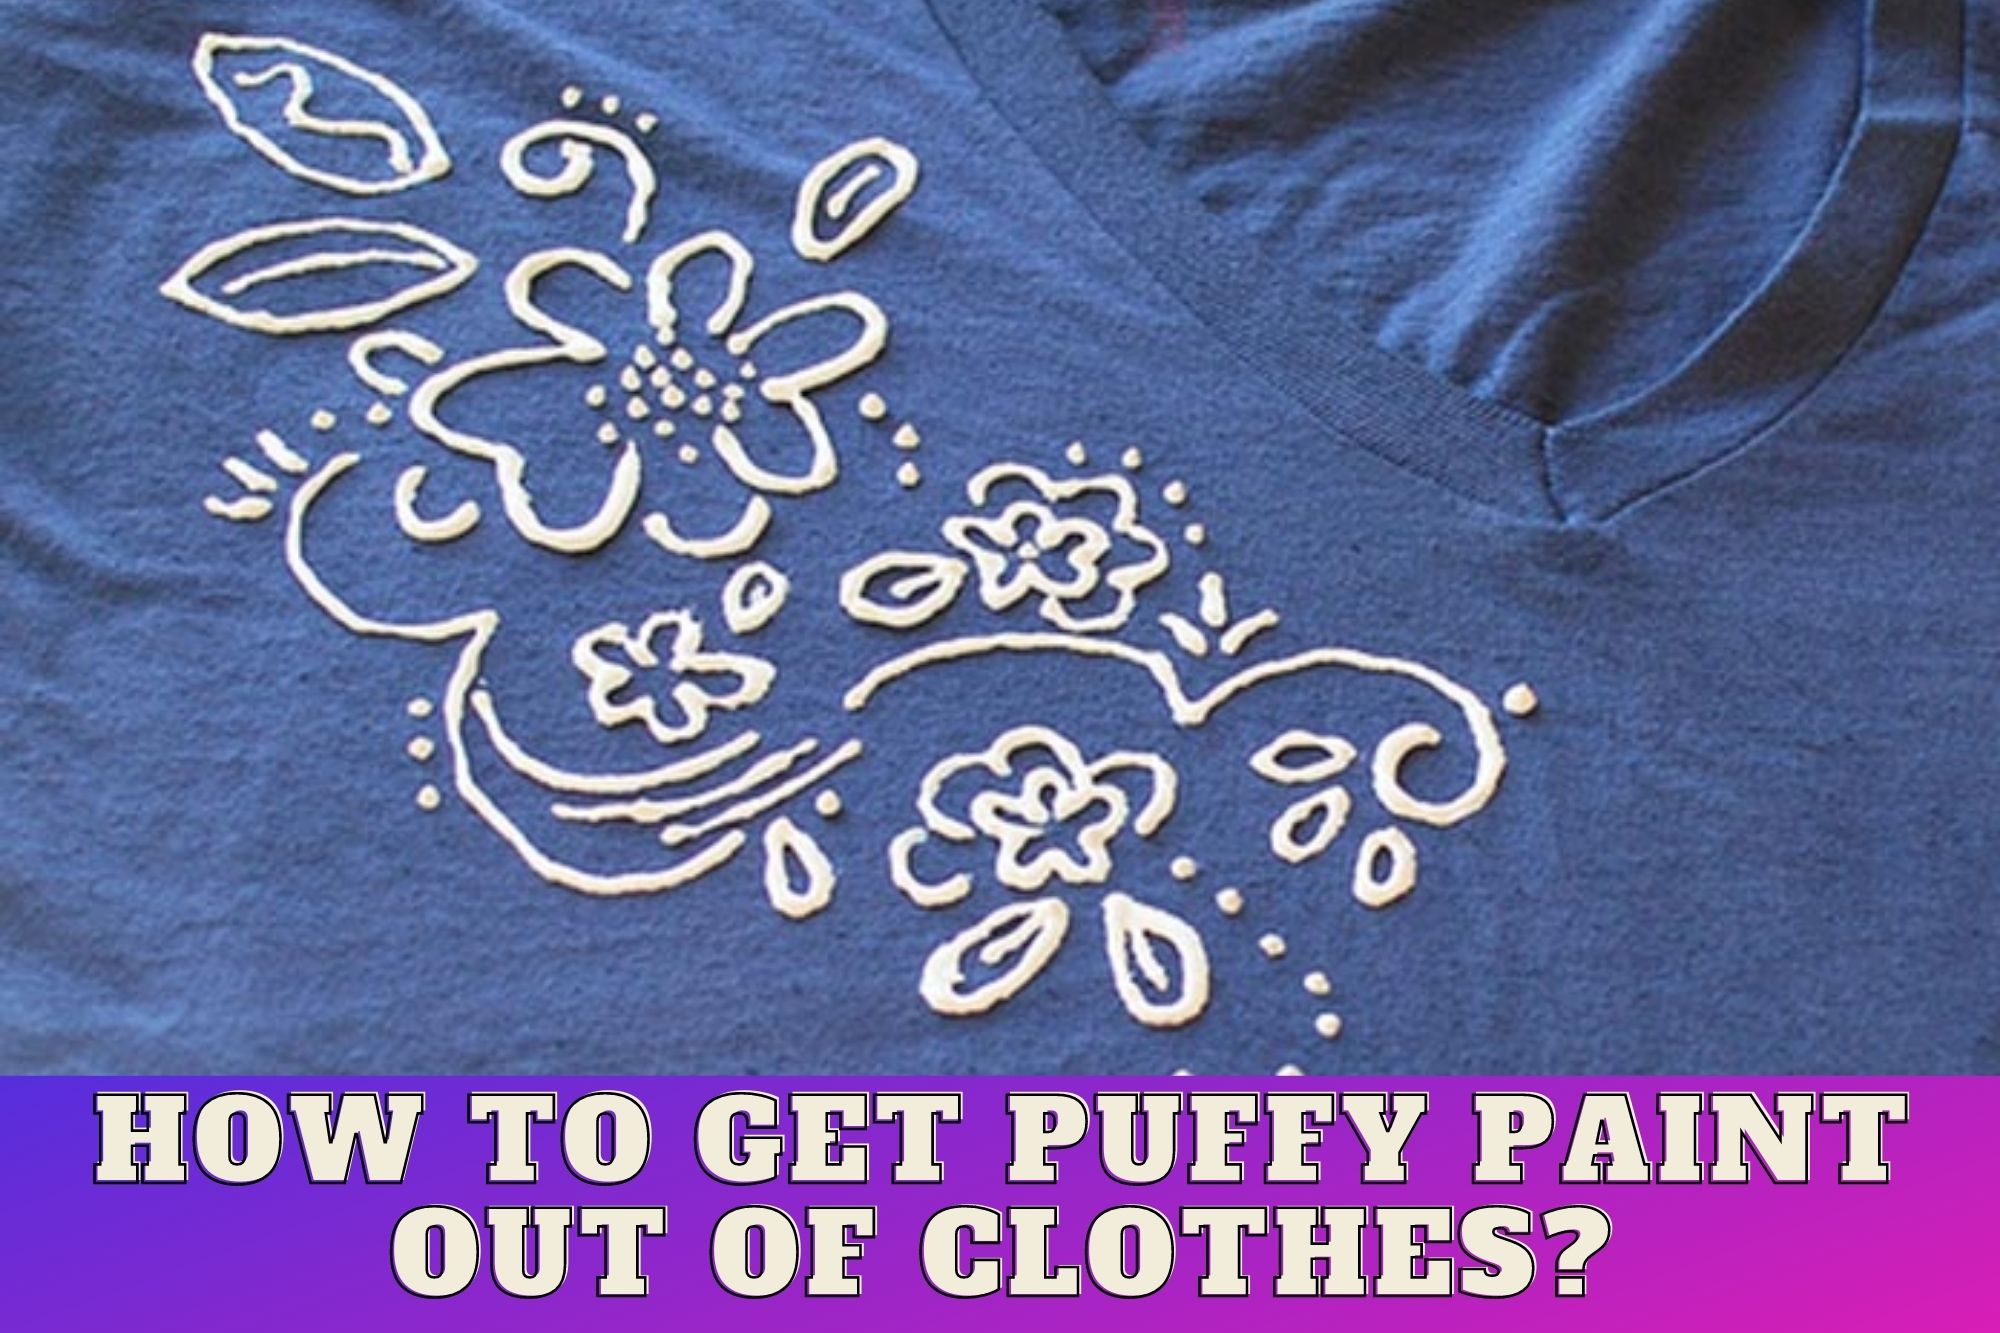 How To Get Puffy Paint Out Of Clothes?